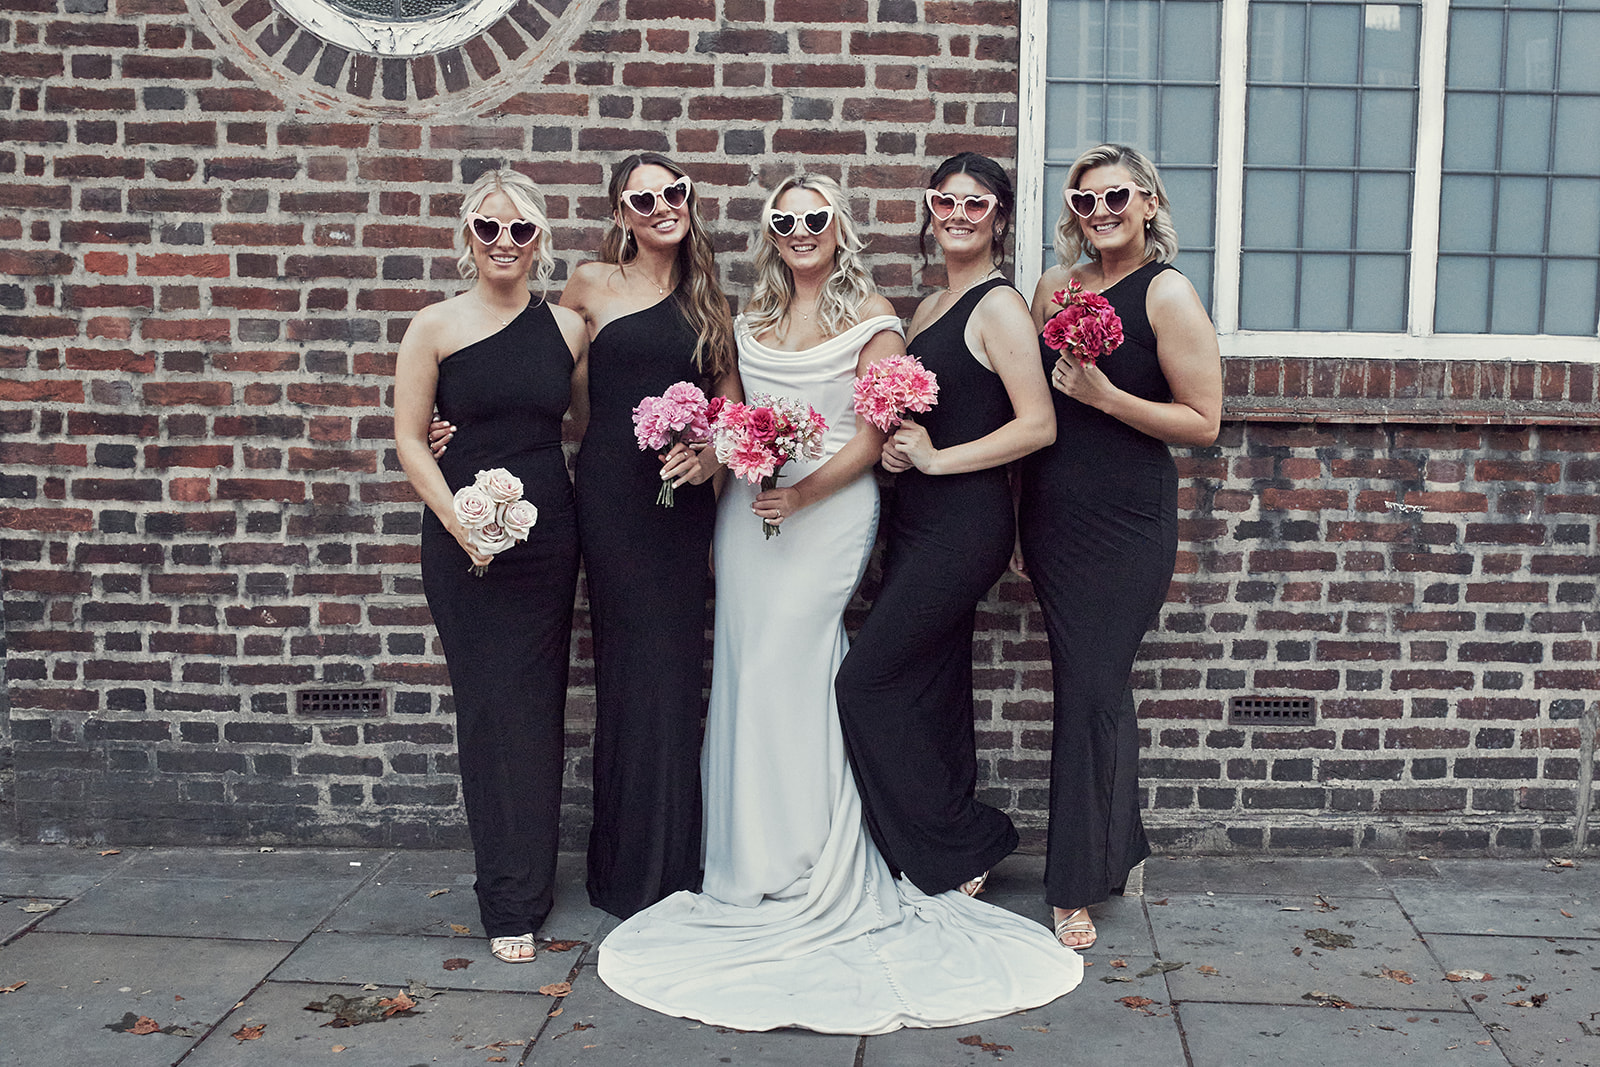 sweet portrait of Katy and bride's maids on the streets of London